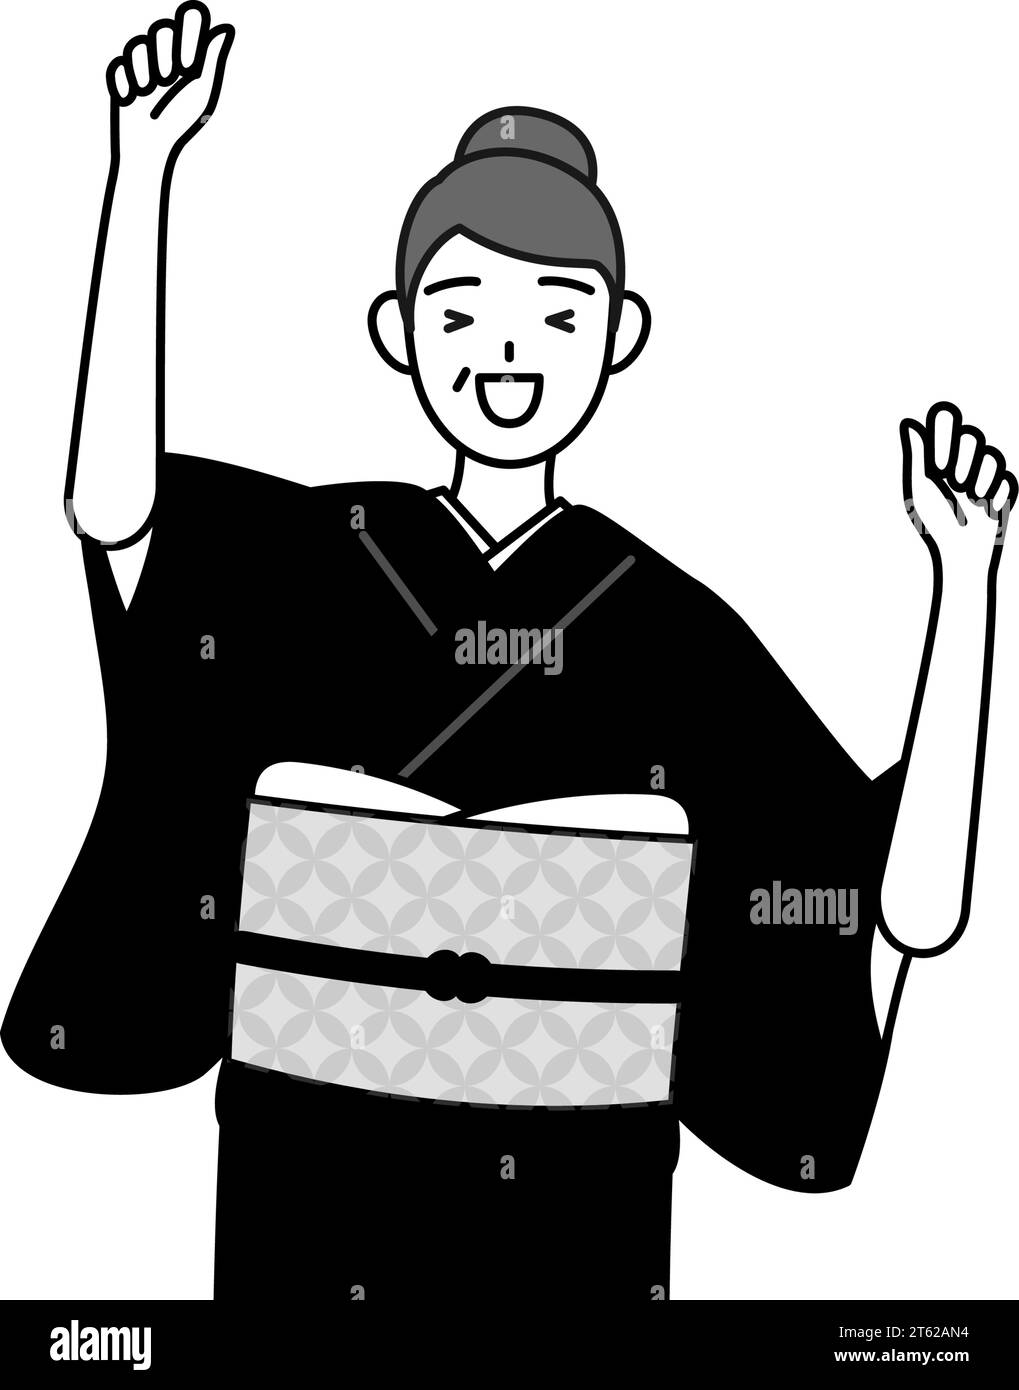 New Year's greeting and weddings, Senior woman in kimono smiling and jumping, Vector Illustration Stock Vector